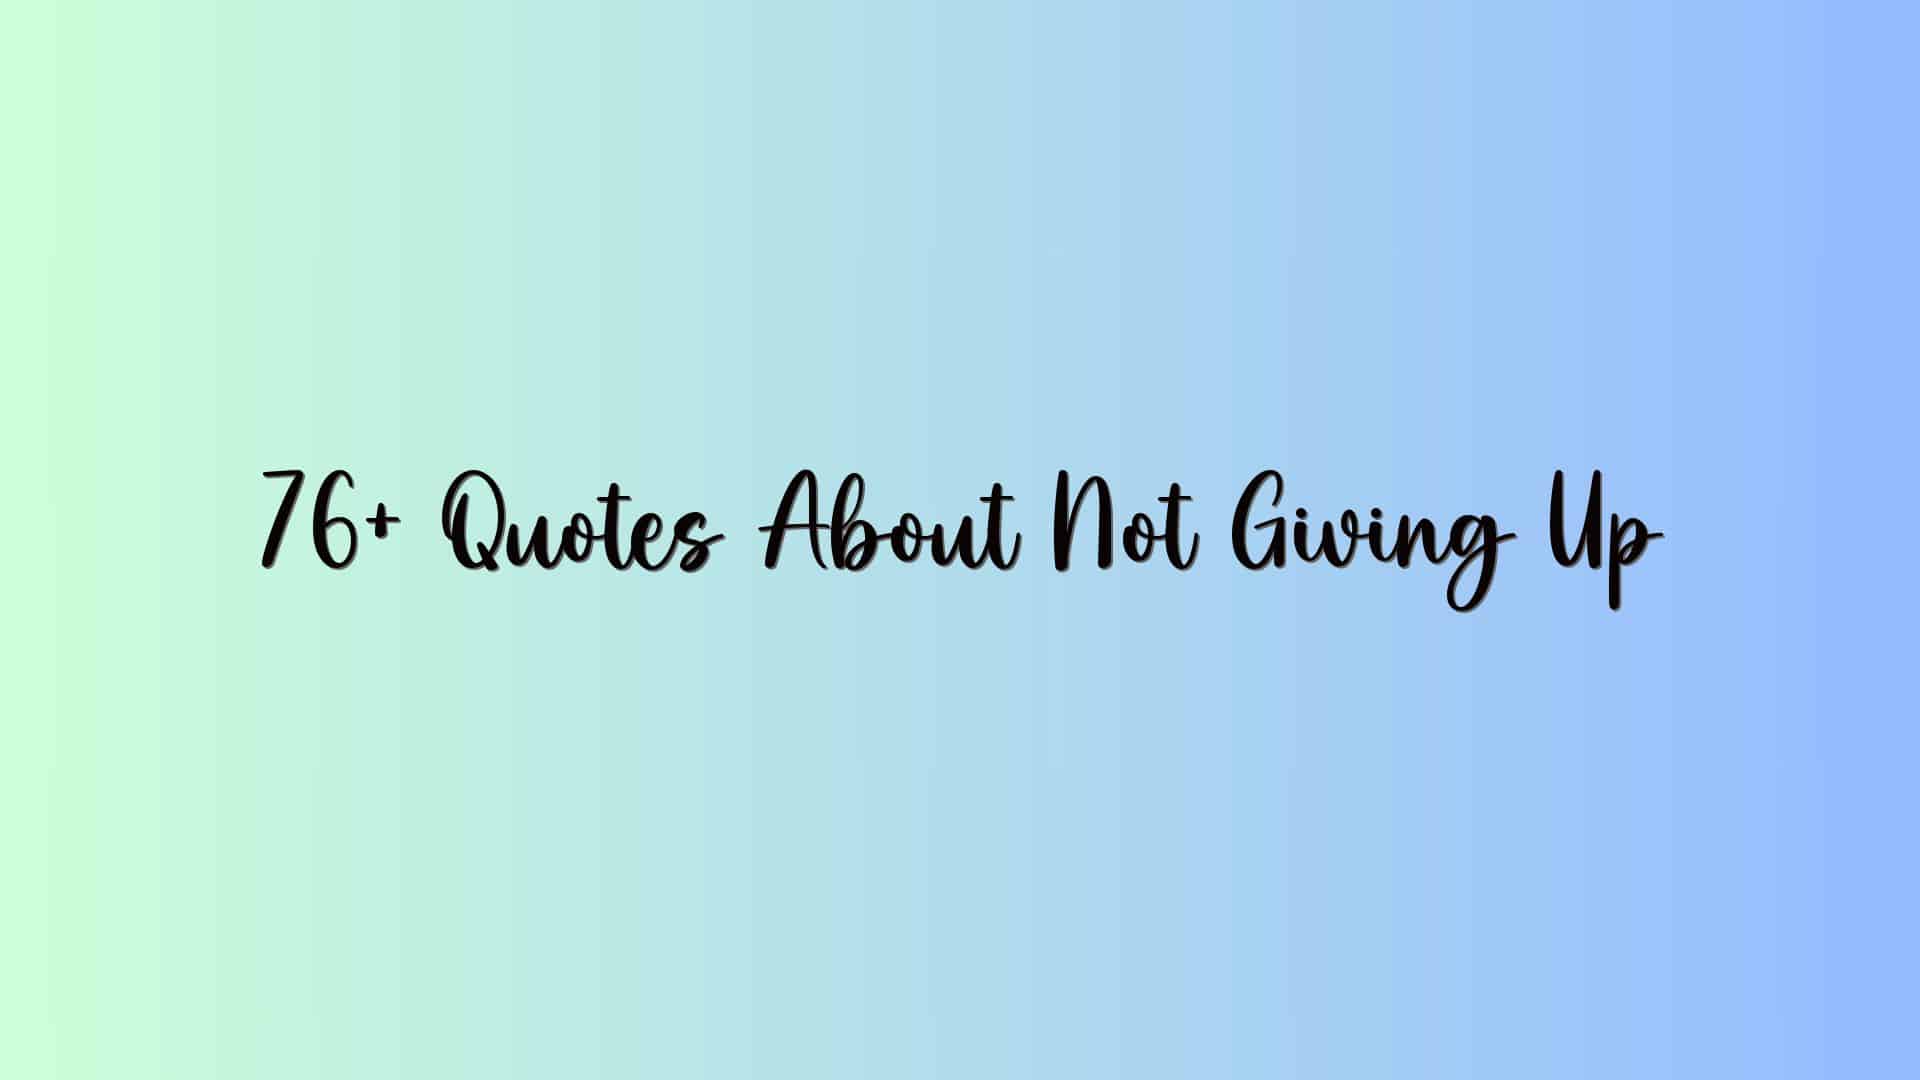 76+ Quotes About Not Giving Up